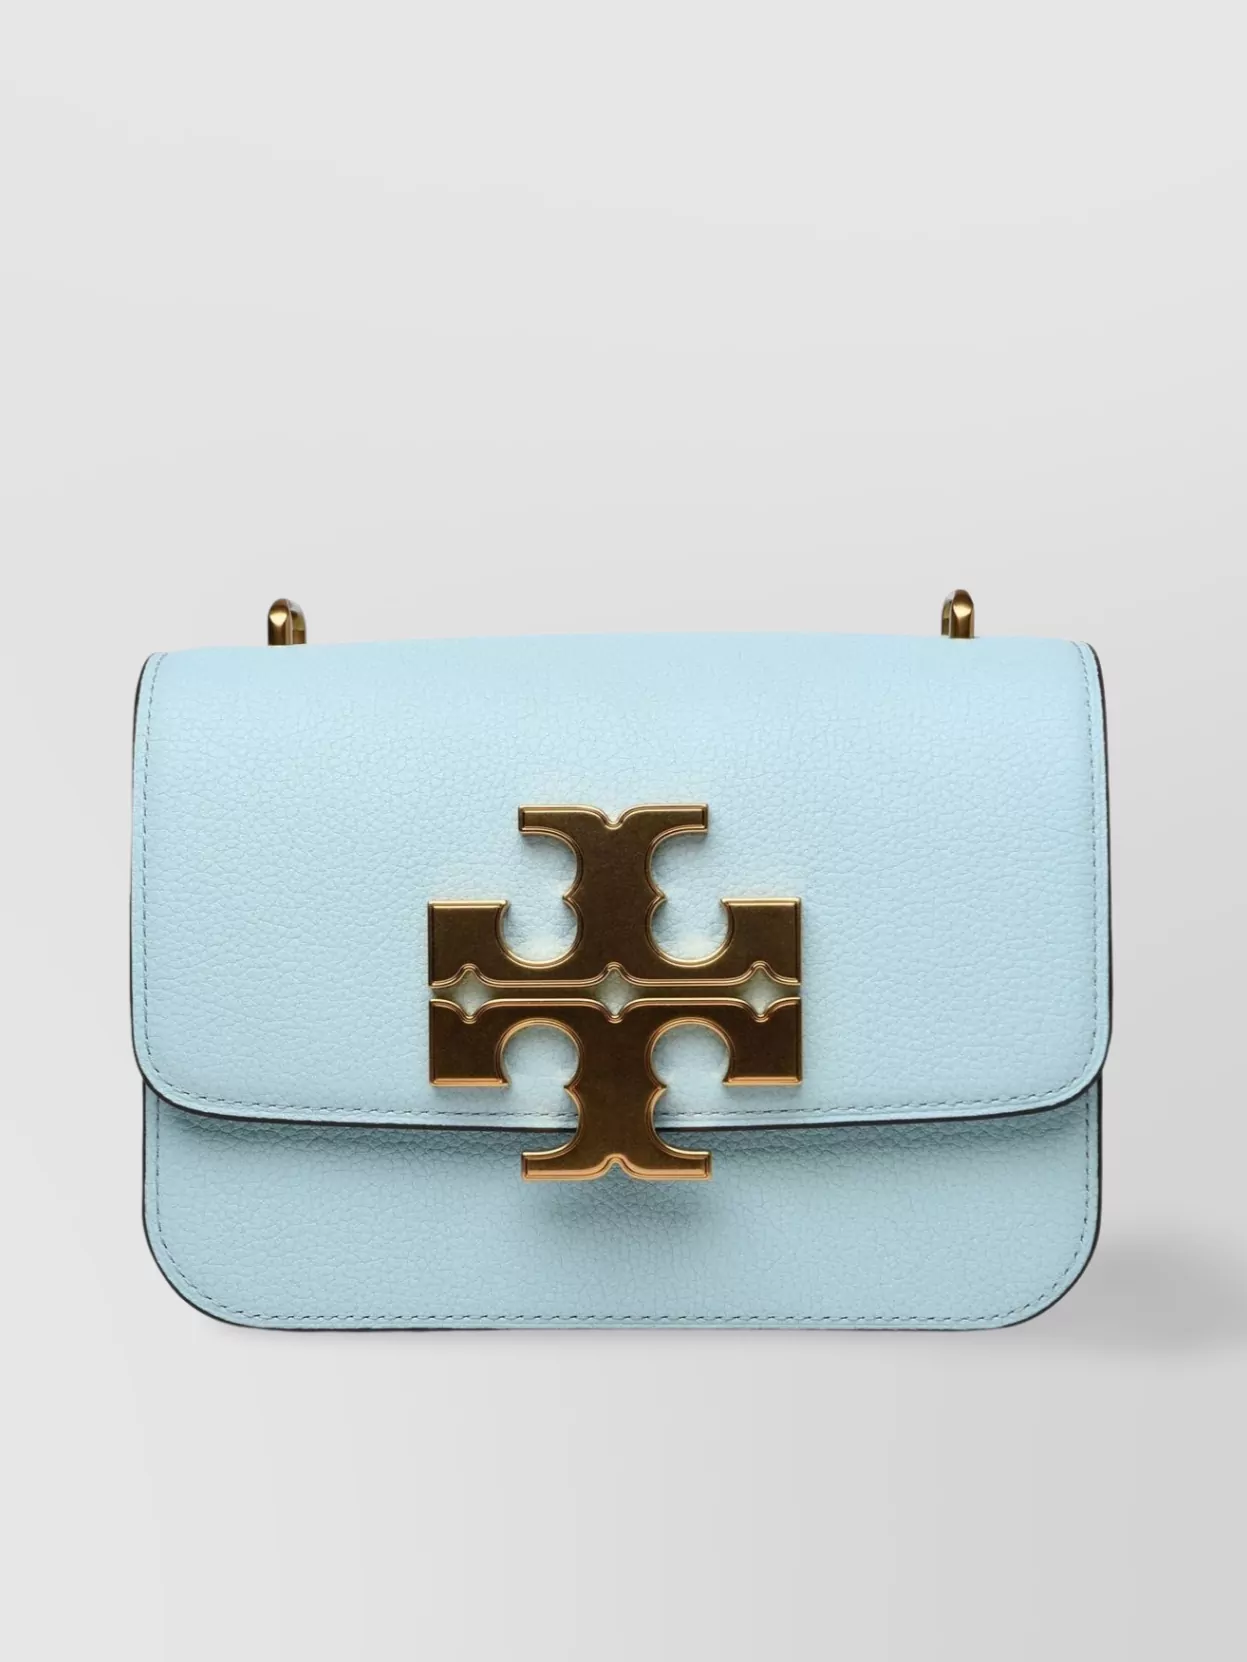 Shop Tory Burch 'eleanor' Small Leather Bag